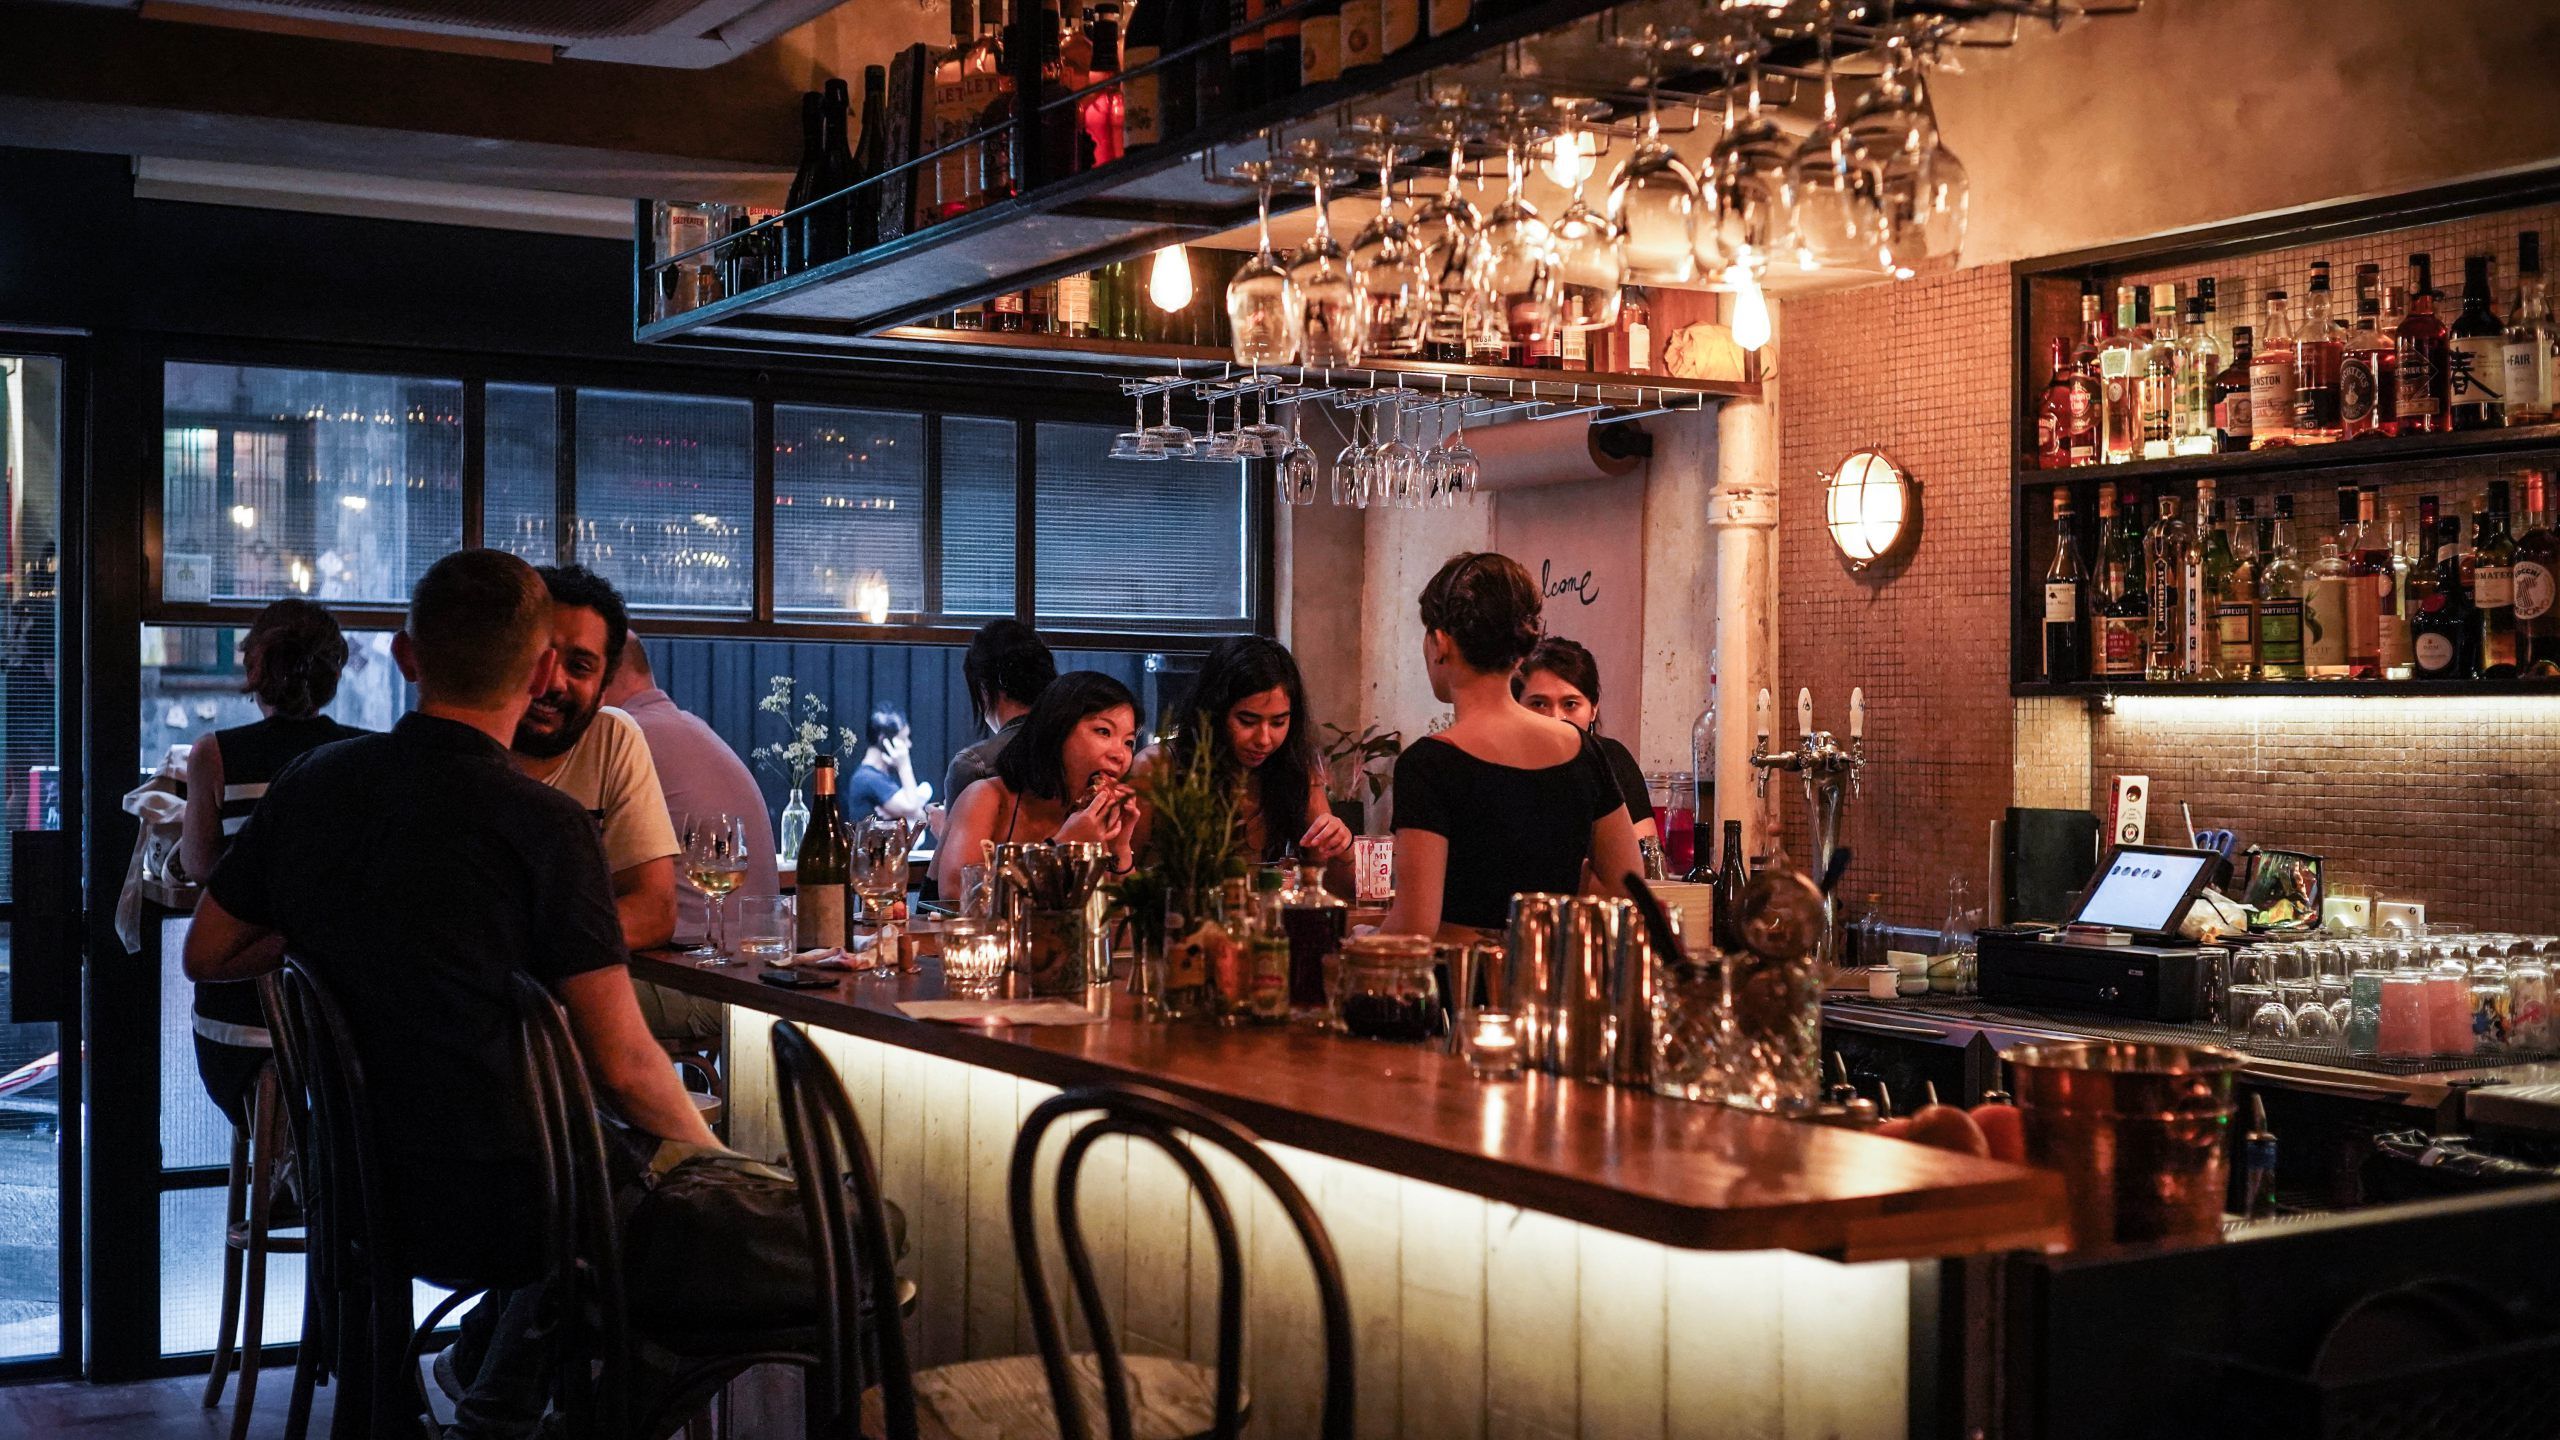 Shady Acres is the indie wine bar Hong Kong has been waiting for